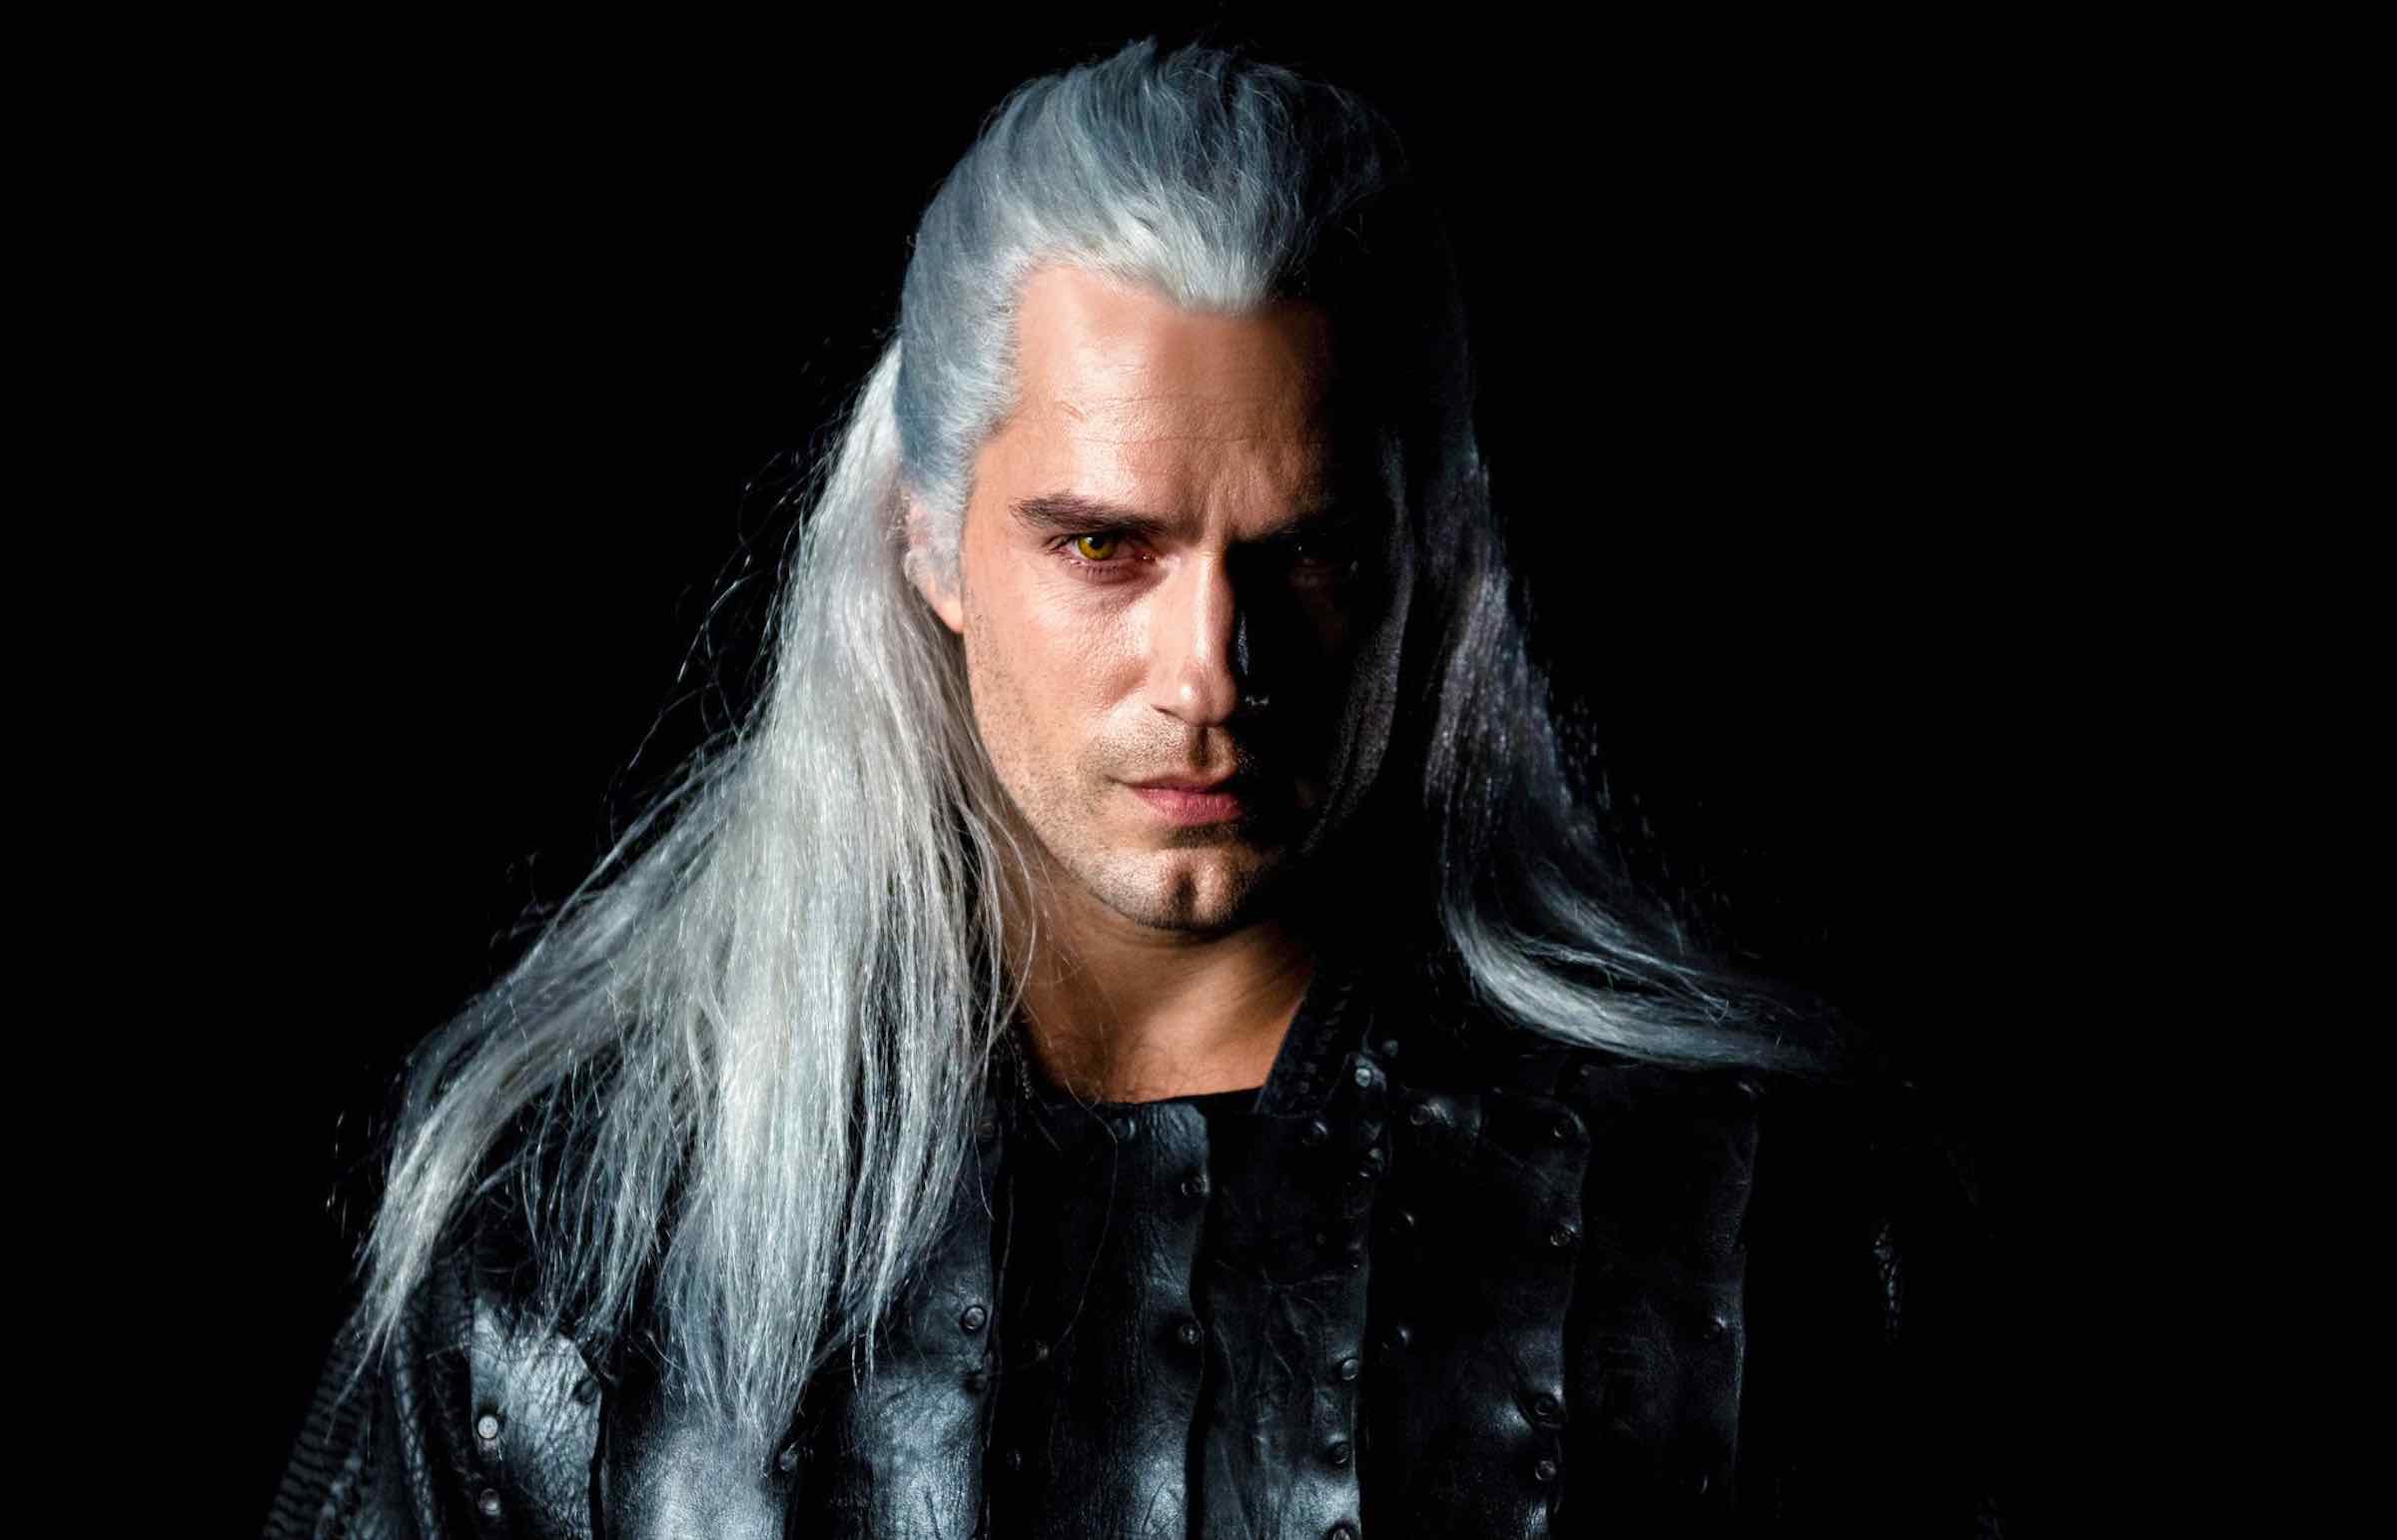 'The Witcher' has a lot of backstory, and the more you know going in, the more you’ll be able to get out of the show. Who's Geralt of Rivia? Let's find out.